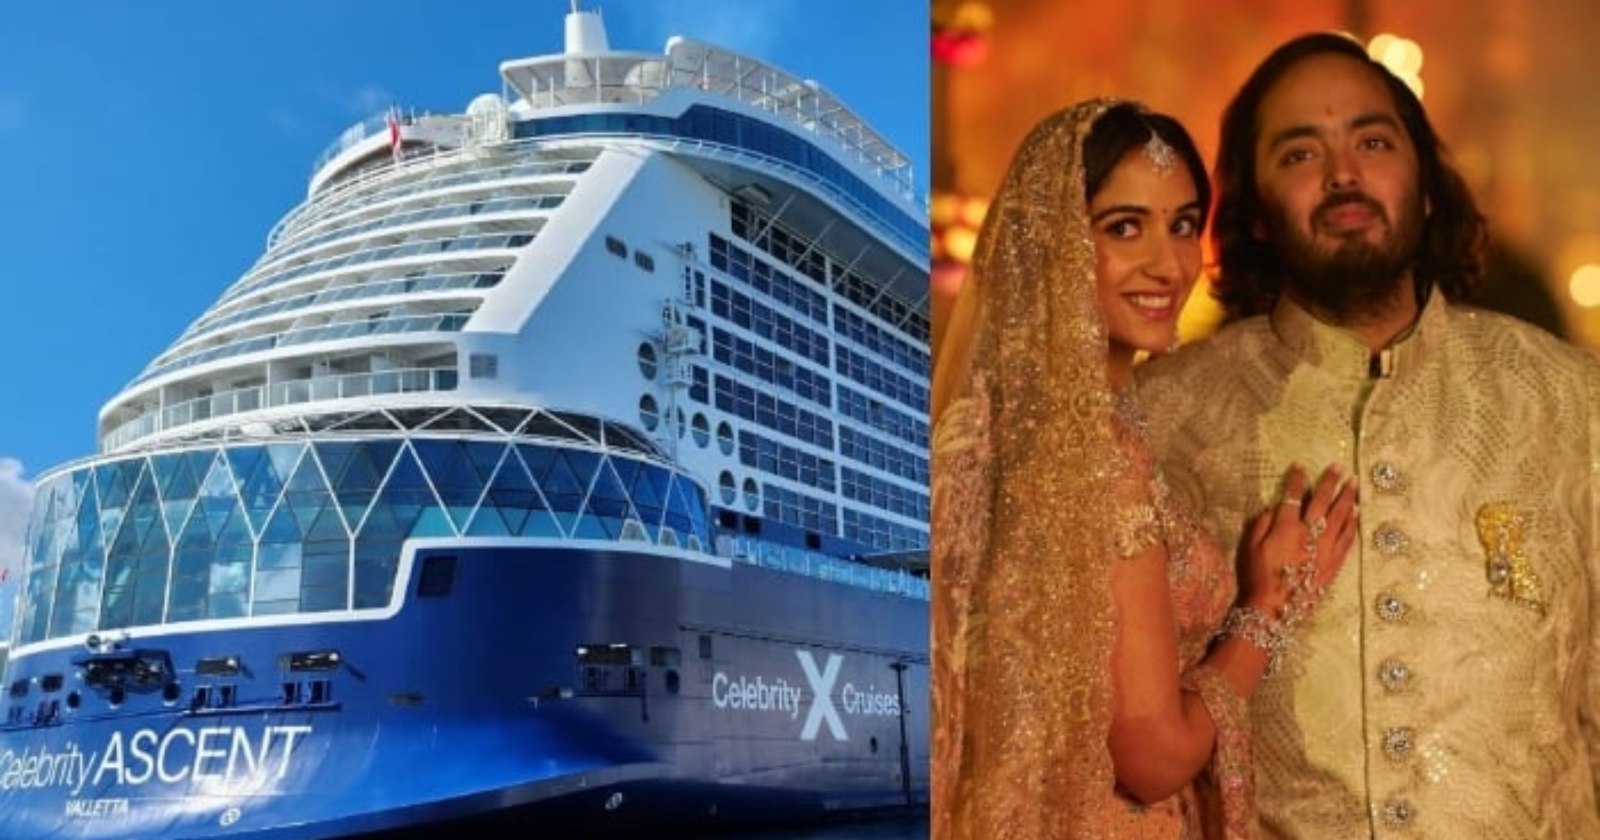 From Cruise Rooms Costing More Than a Fortune to Lavish